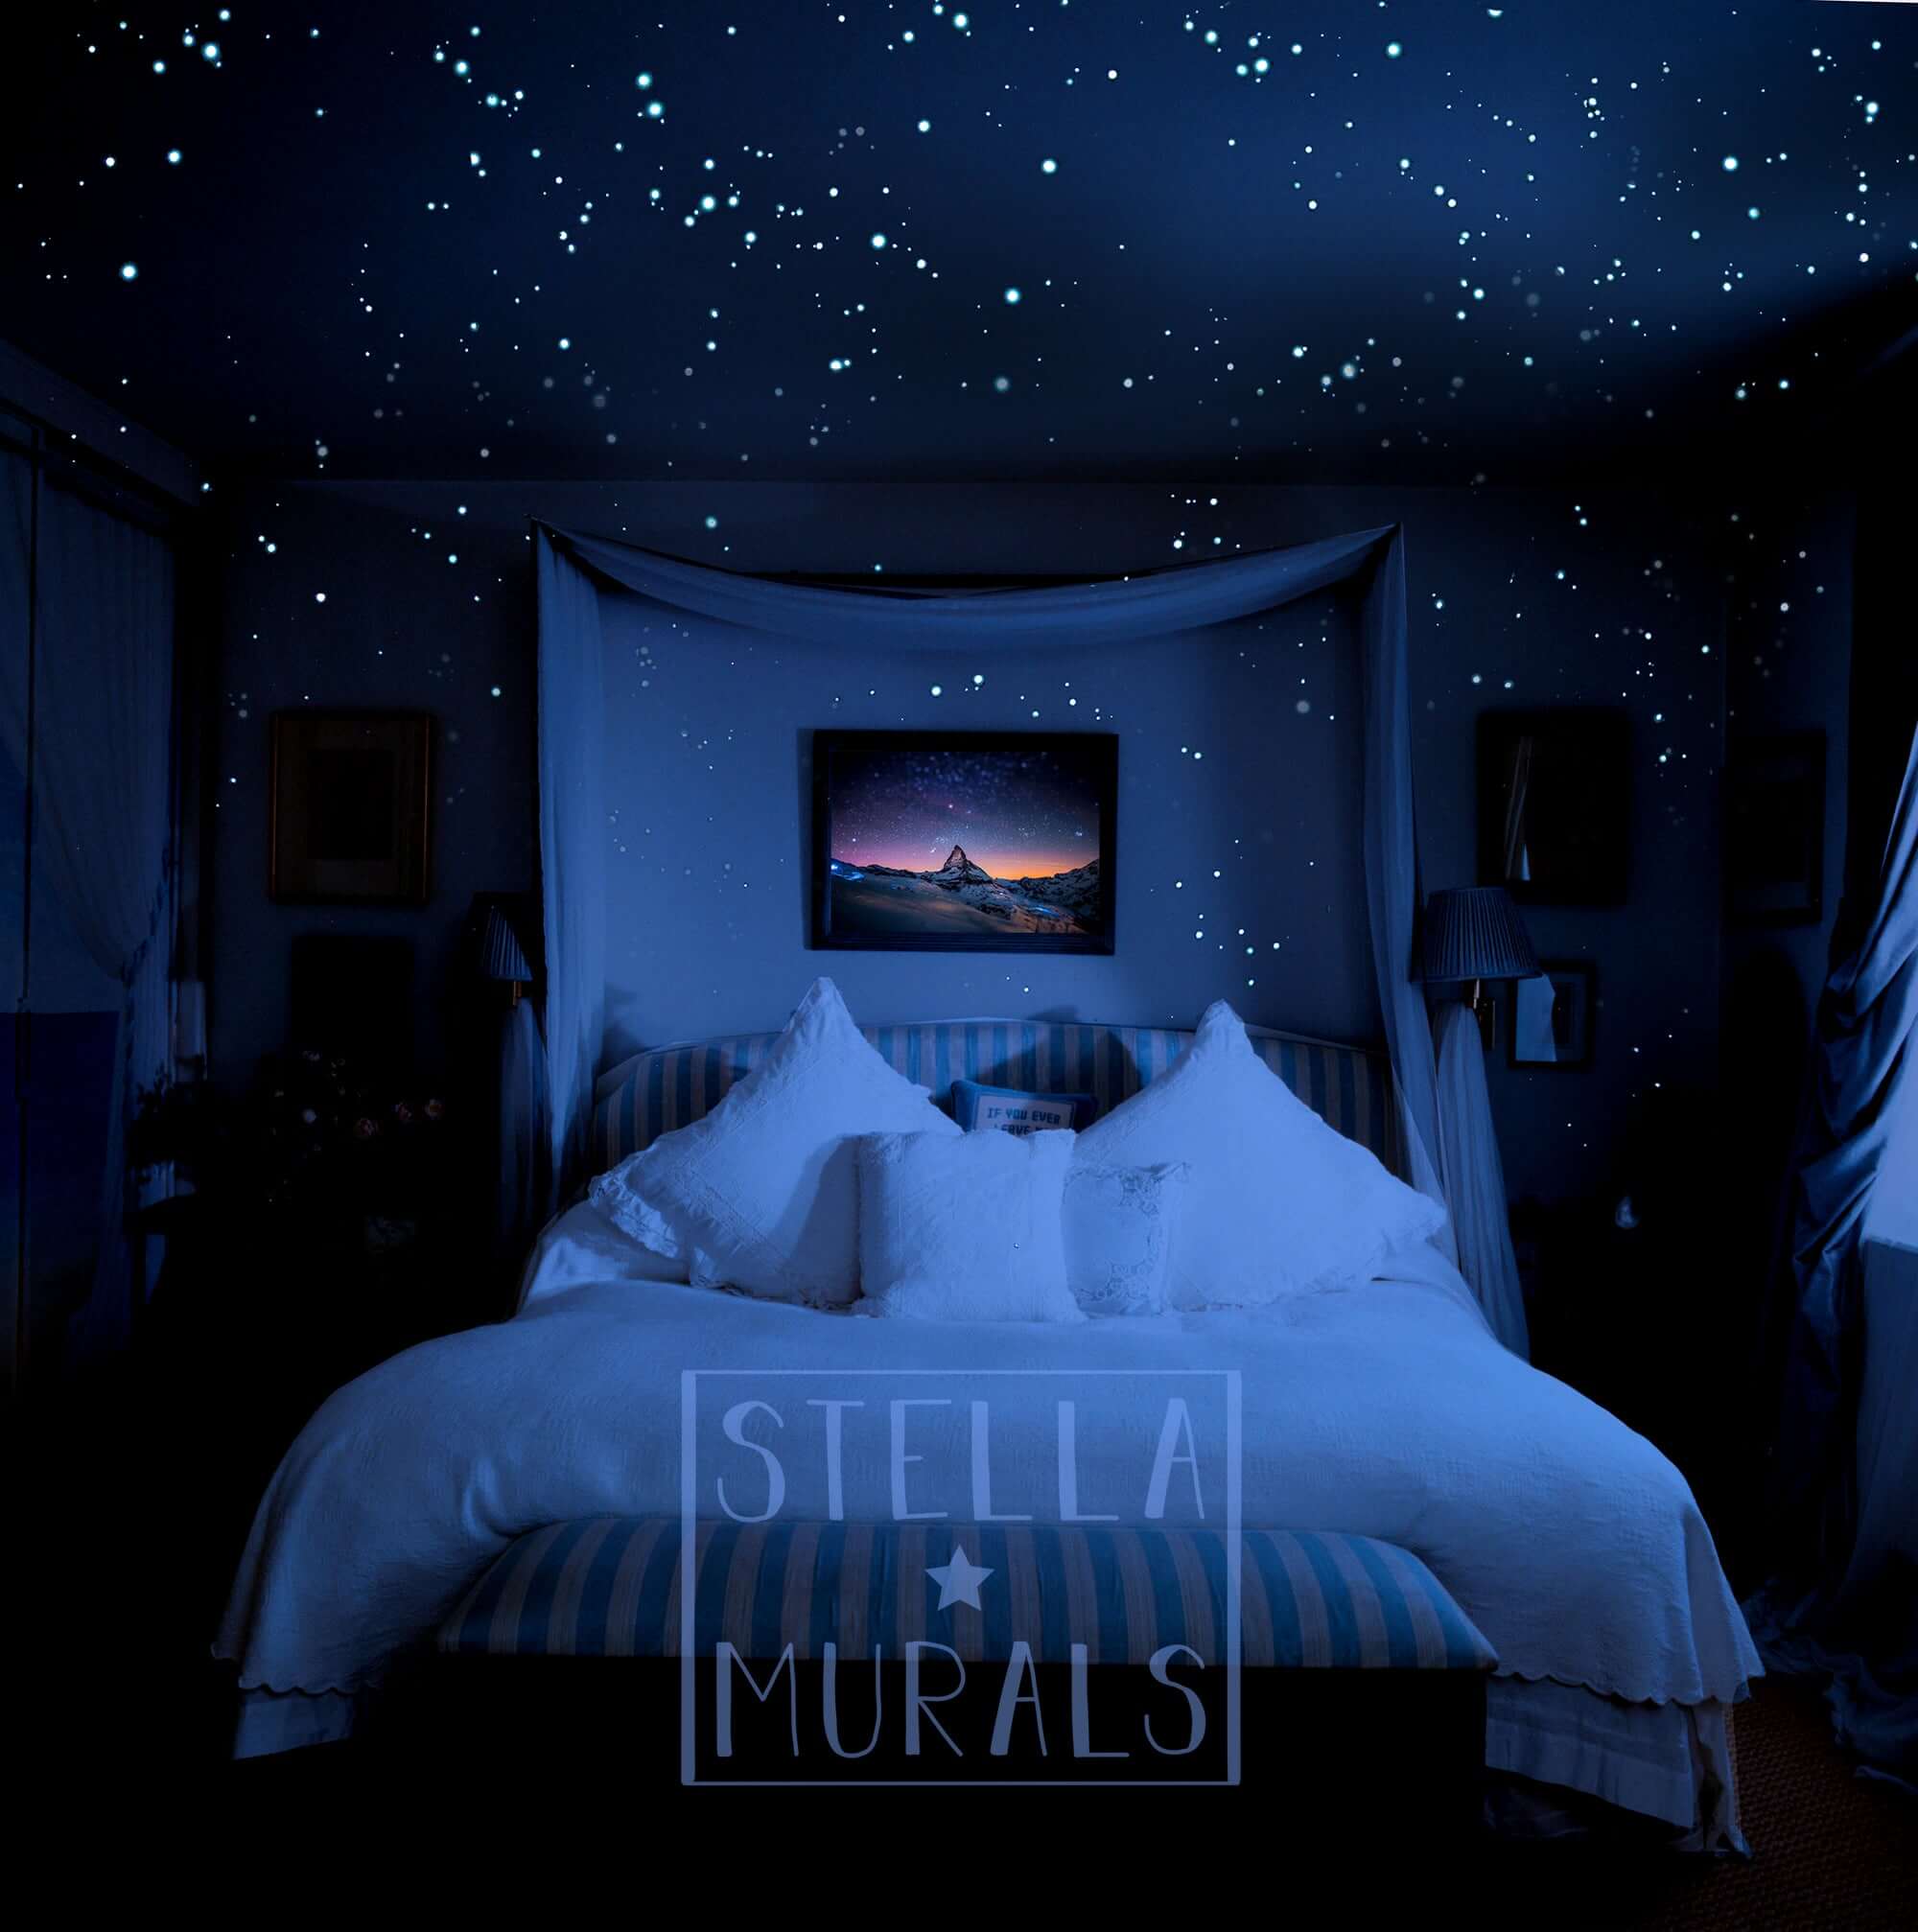 Glow in the Dark Stars for a Realistic Night Sky Ceiling - Stella Murals